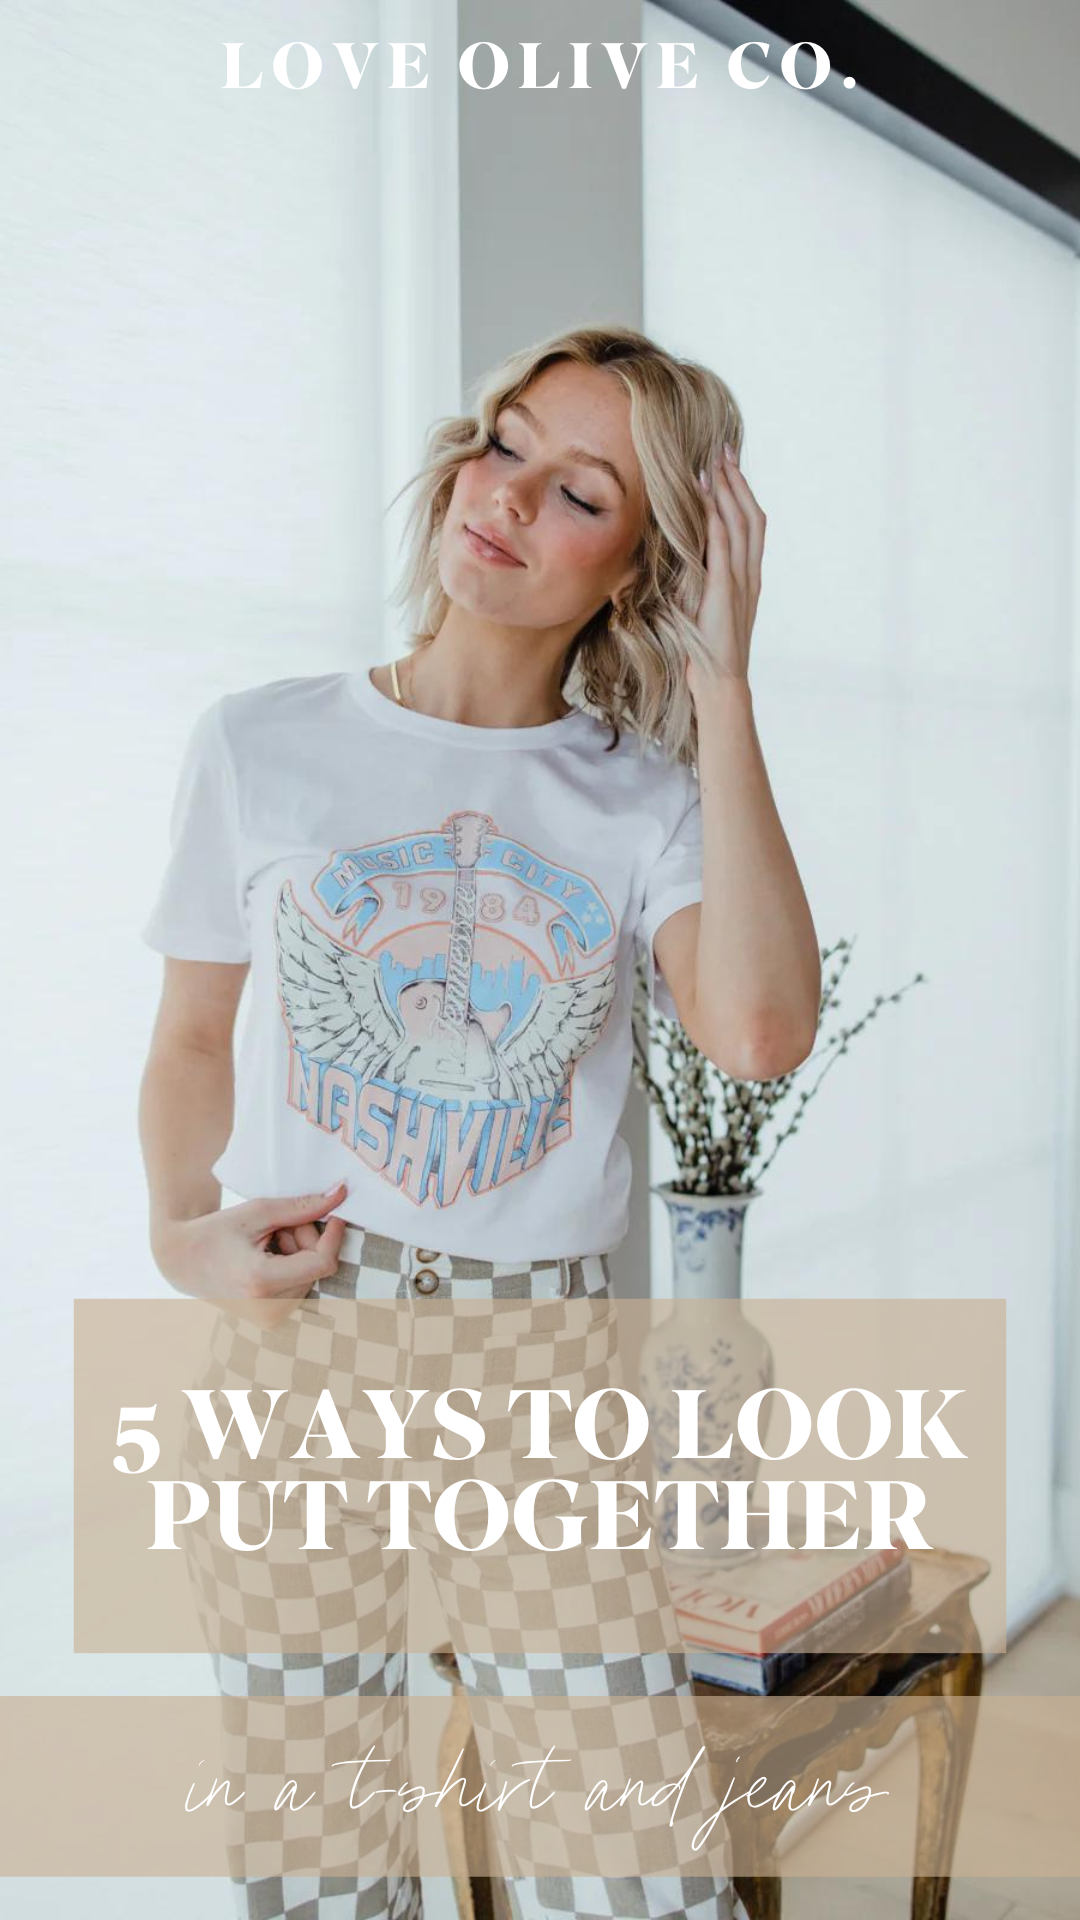 5 ways to look put together in a t-shirt and jeans. www.loveoliveco.com